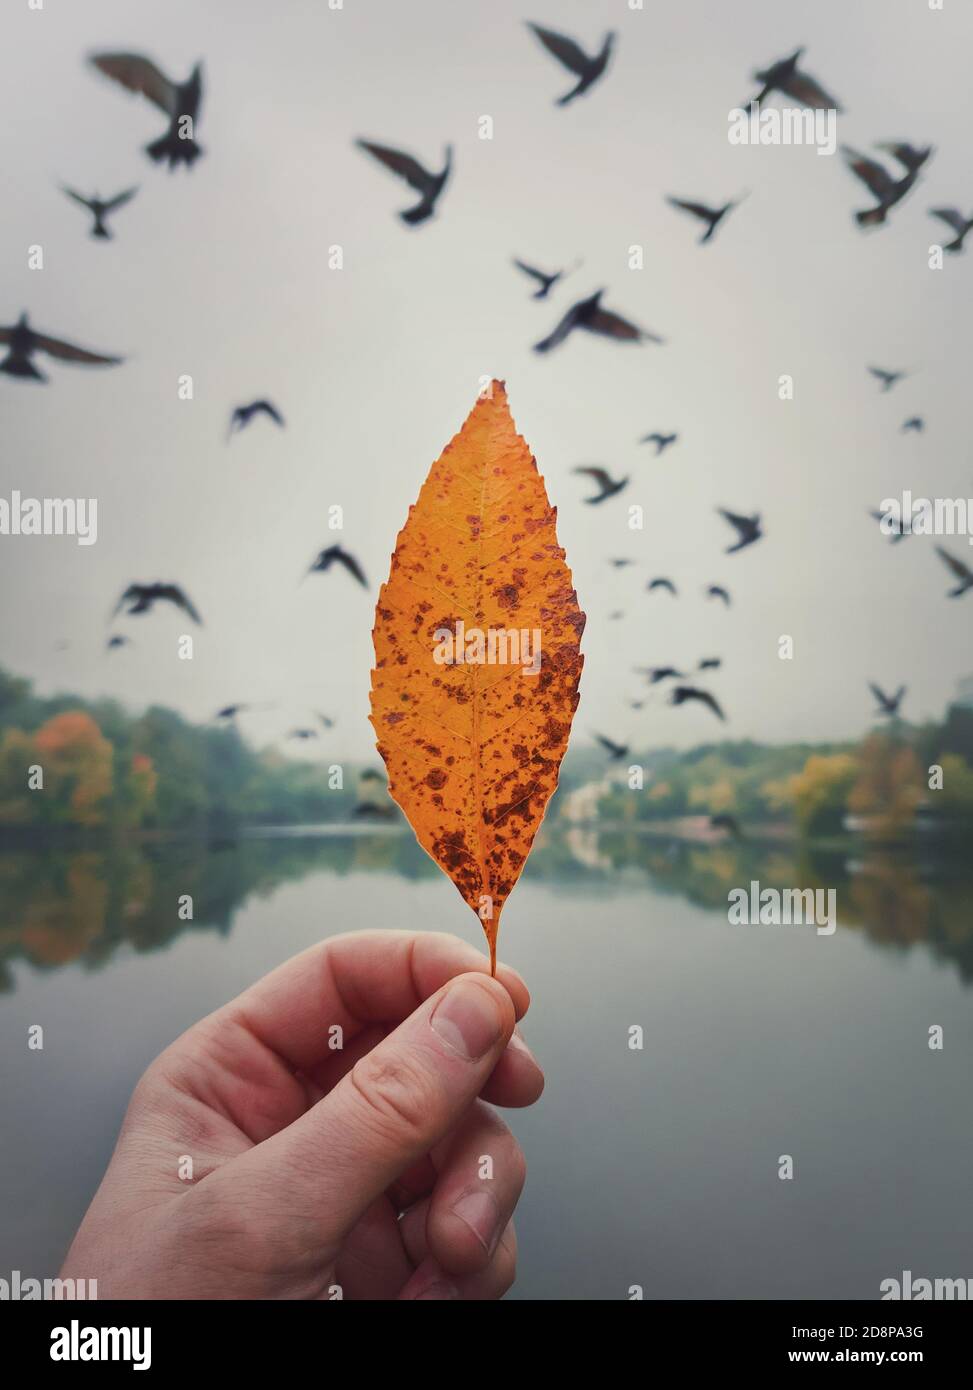 Male hand holding a yellow leaf against the cloudy sky with a flock of flying migratory birds. Autumn mood concept, lifestyle background. Colorful fal Stock Photo